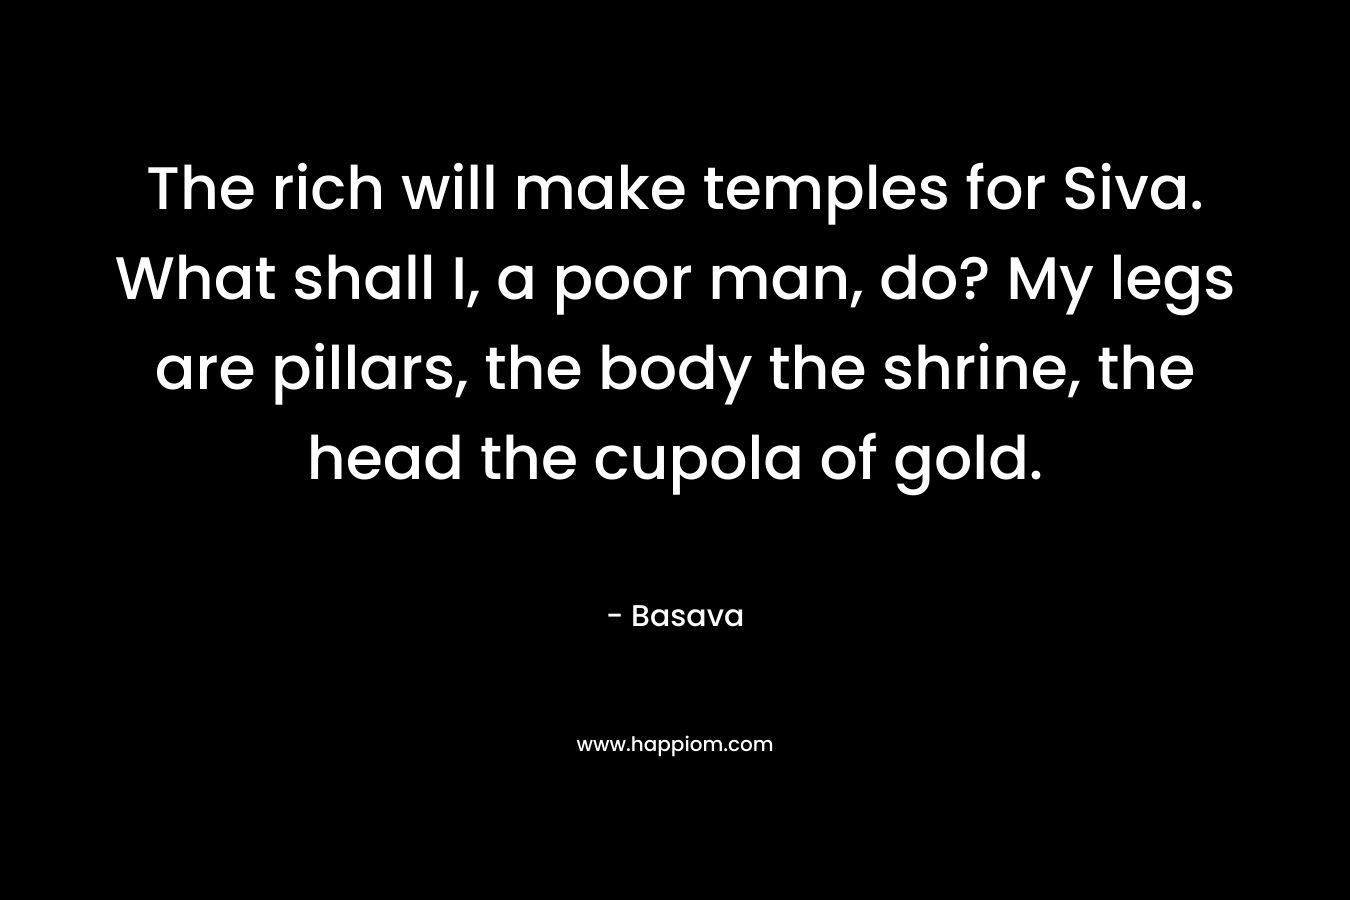 The rich will make temples for Siva. What shall I, a poor man, do? My legs are pillars, the body the shrine, the head the cupola of gold.